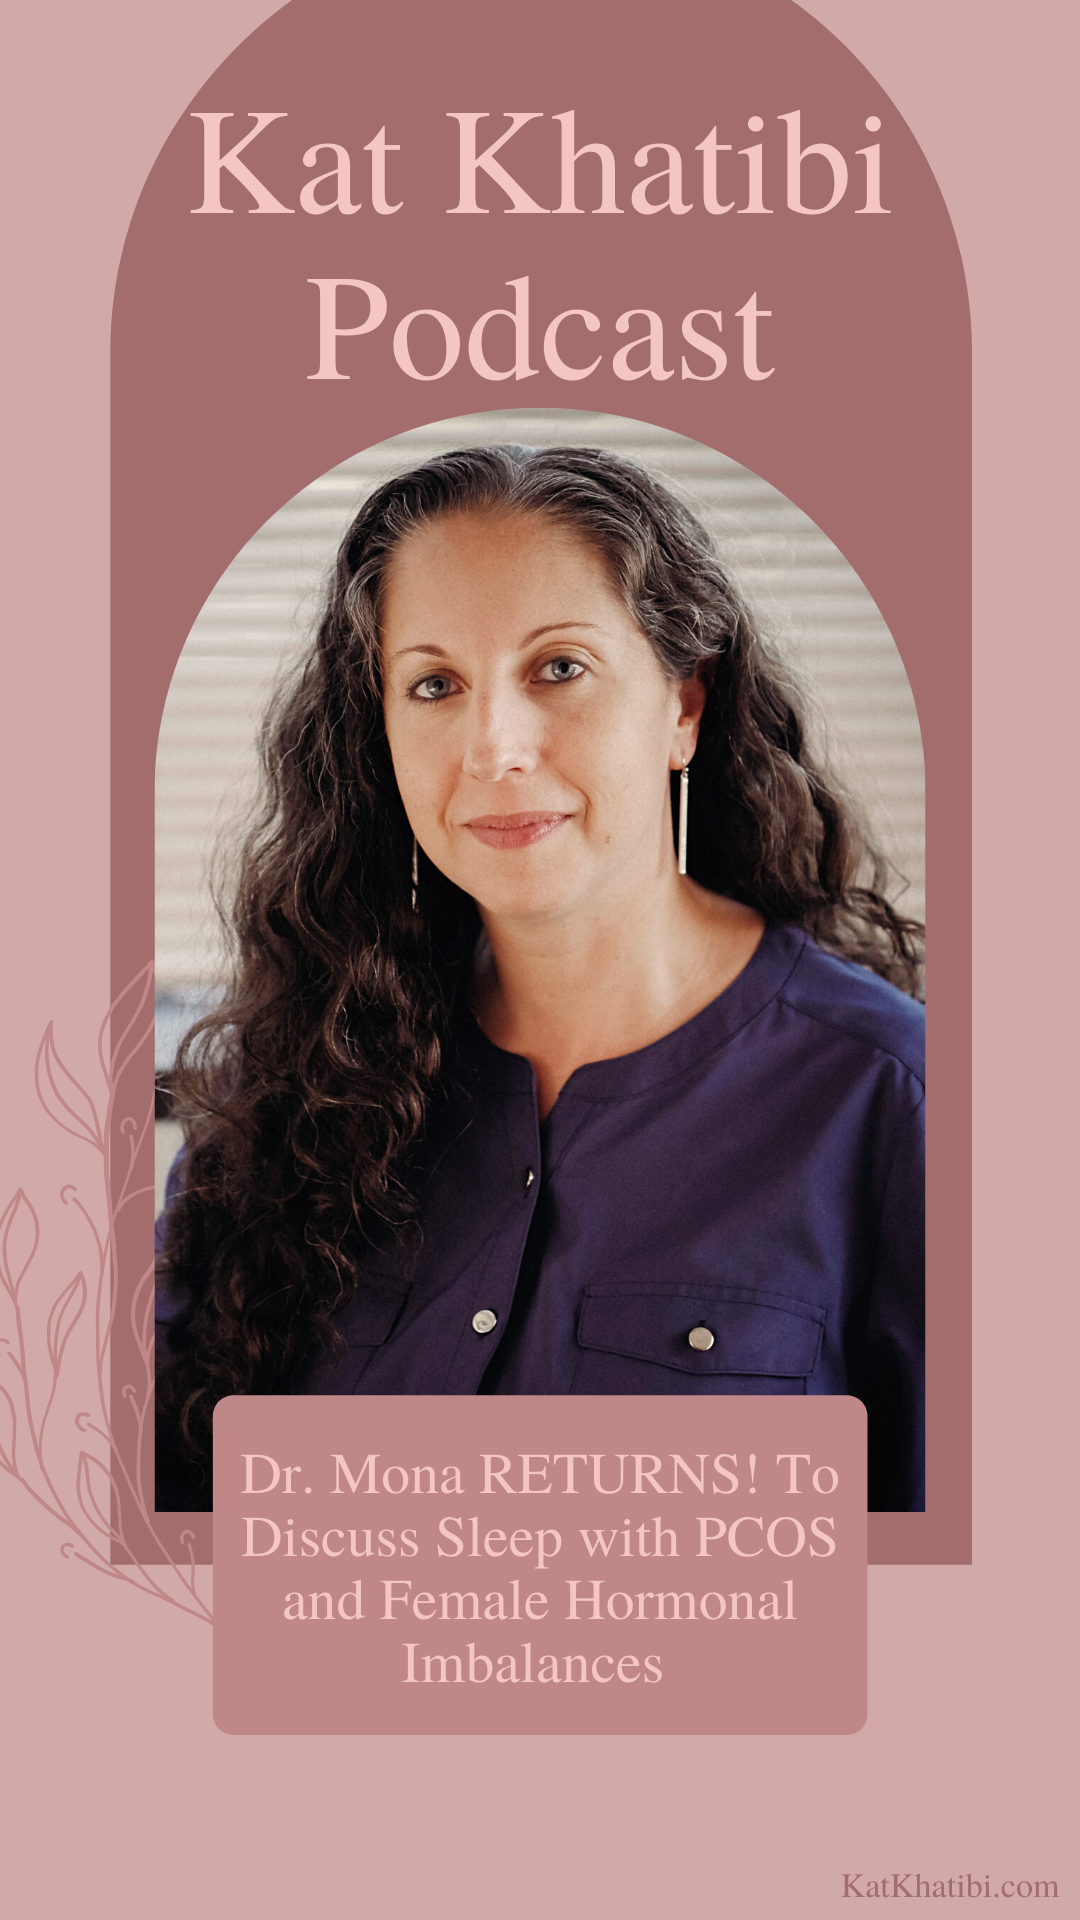 Dr. Mona Fahoum RETURNS to Discuss Sleep with PCOS and Female Hormonal Imbalances